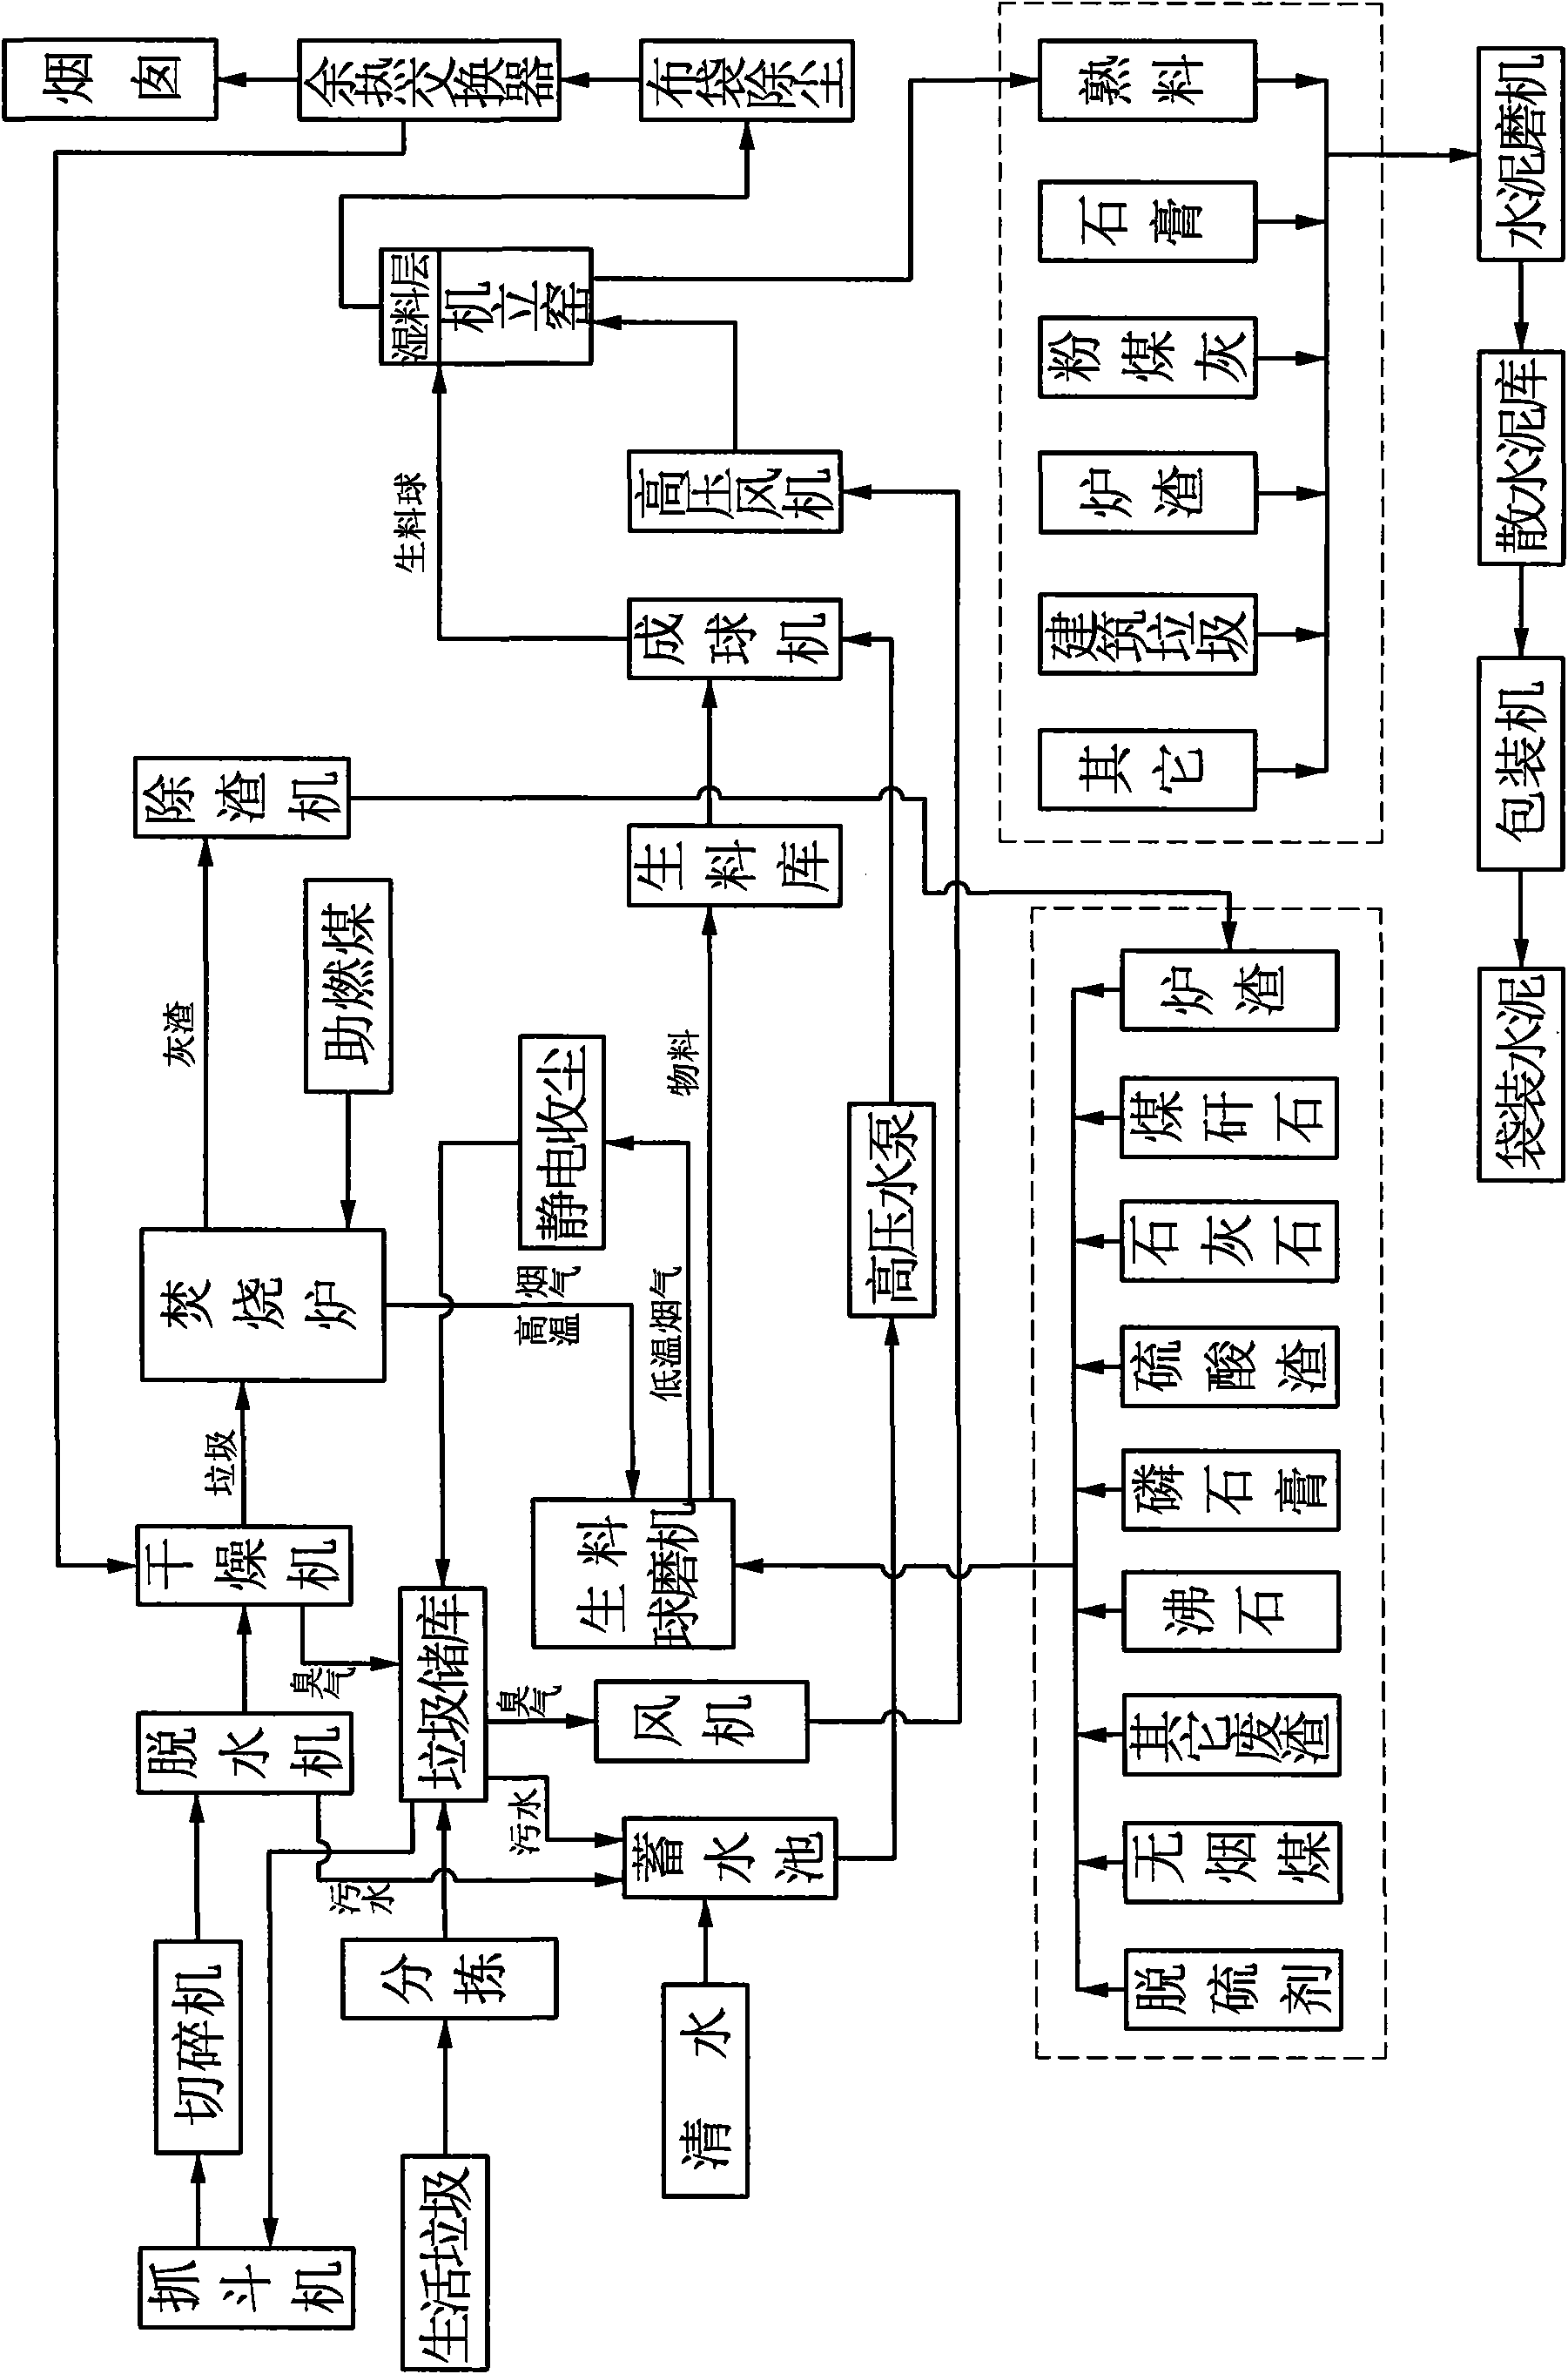 Method for processing municipal solid waste by using shaft kiln cement production line